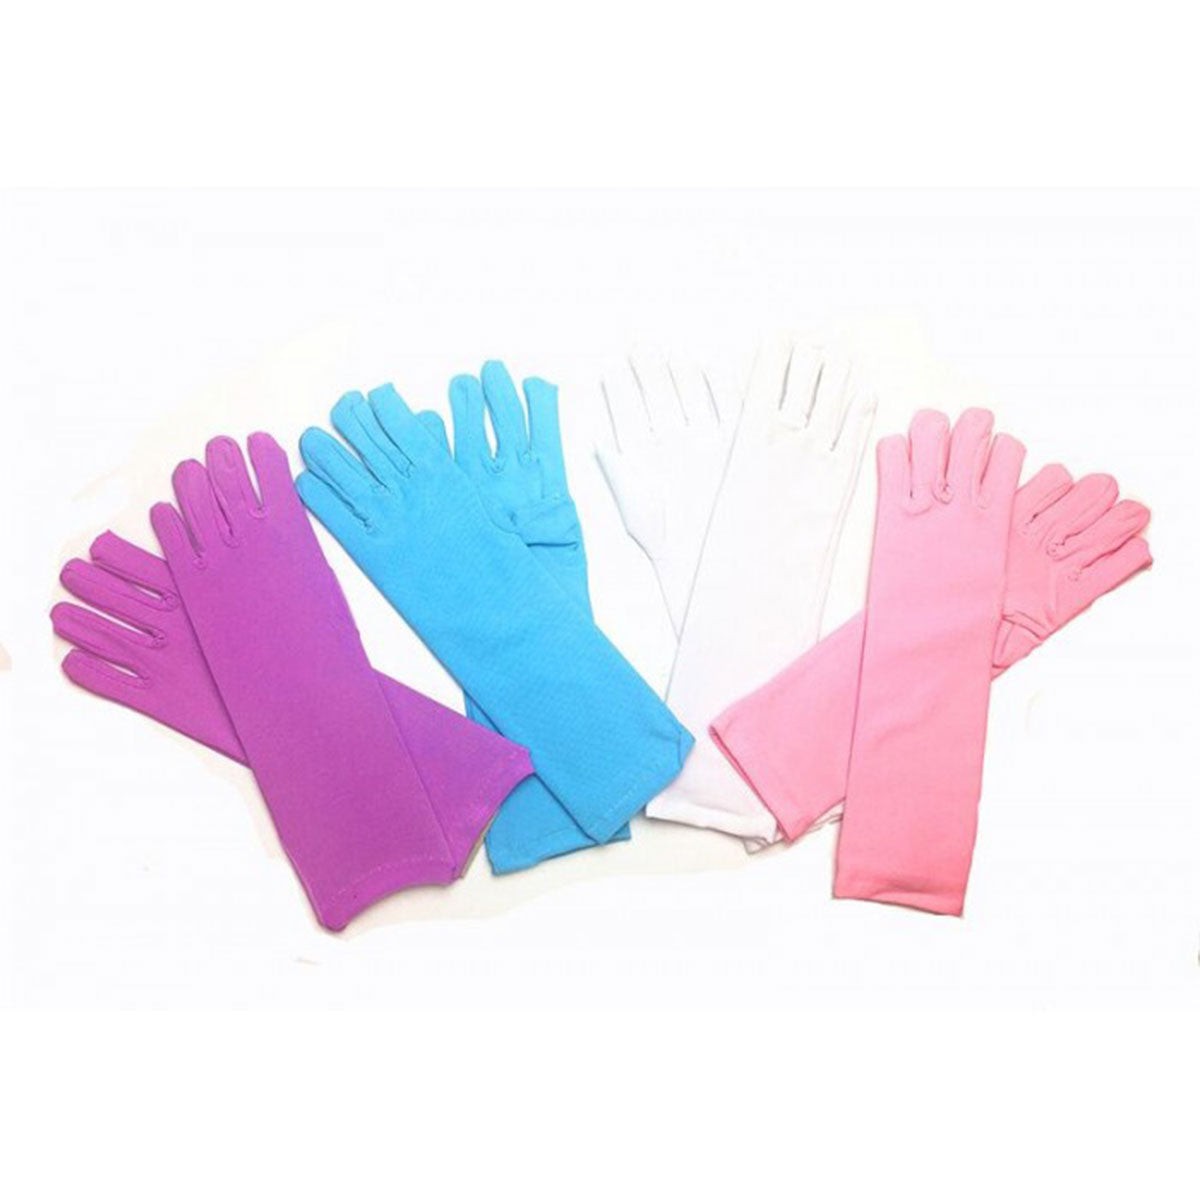 IVY TRADING INC. Costume Accessories Blue Princess Gloves for Kids 8336572041212